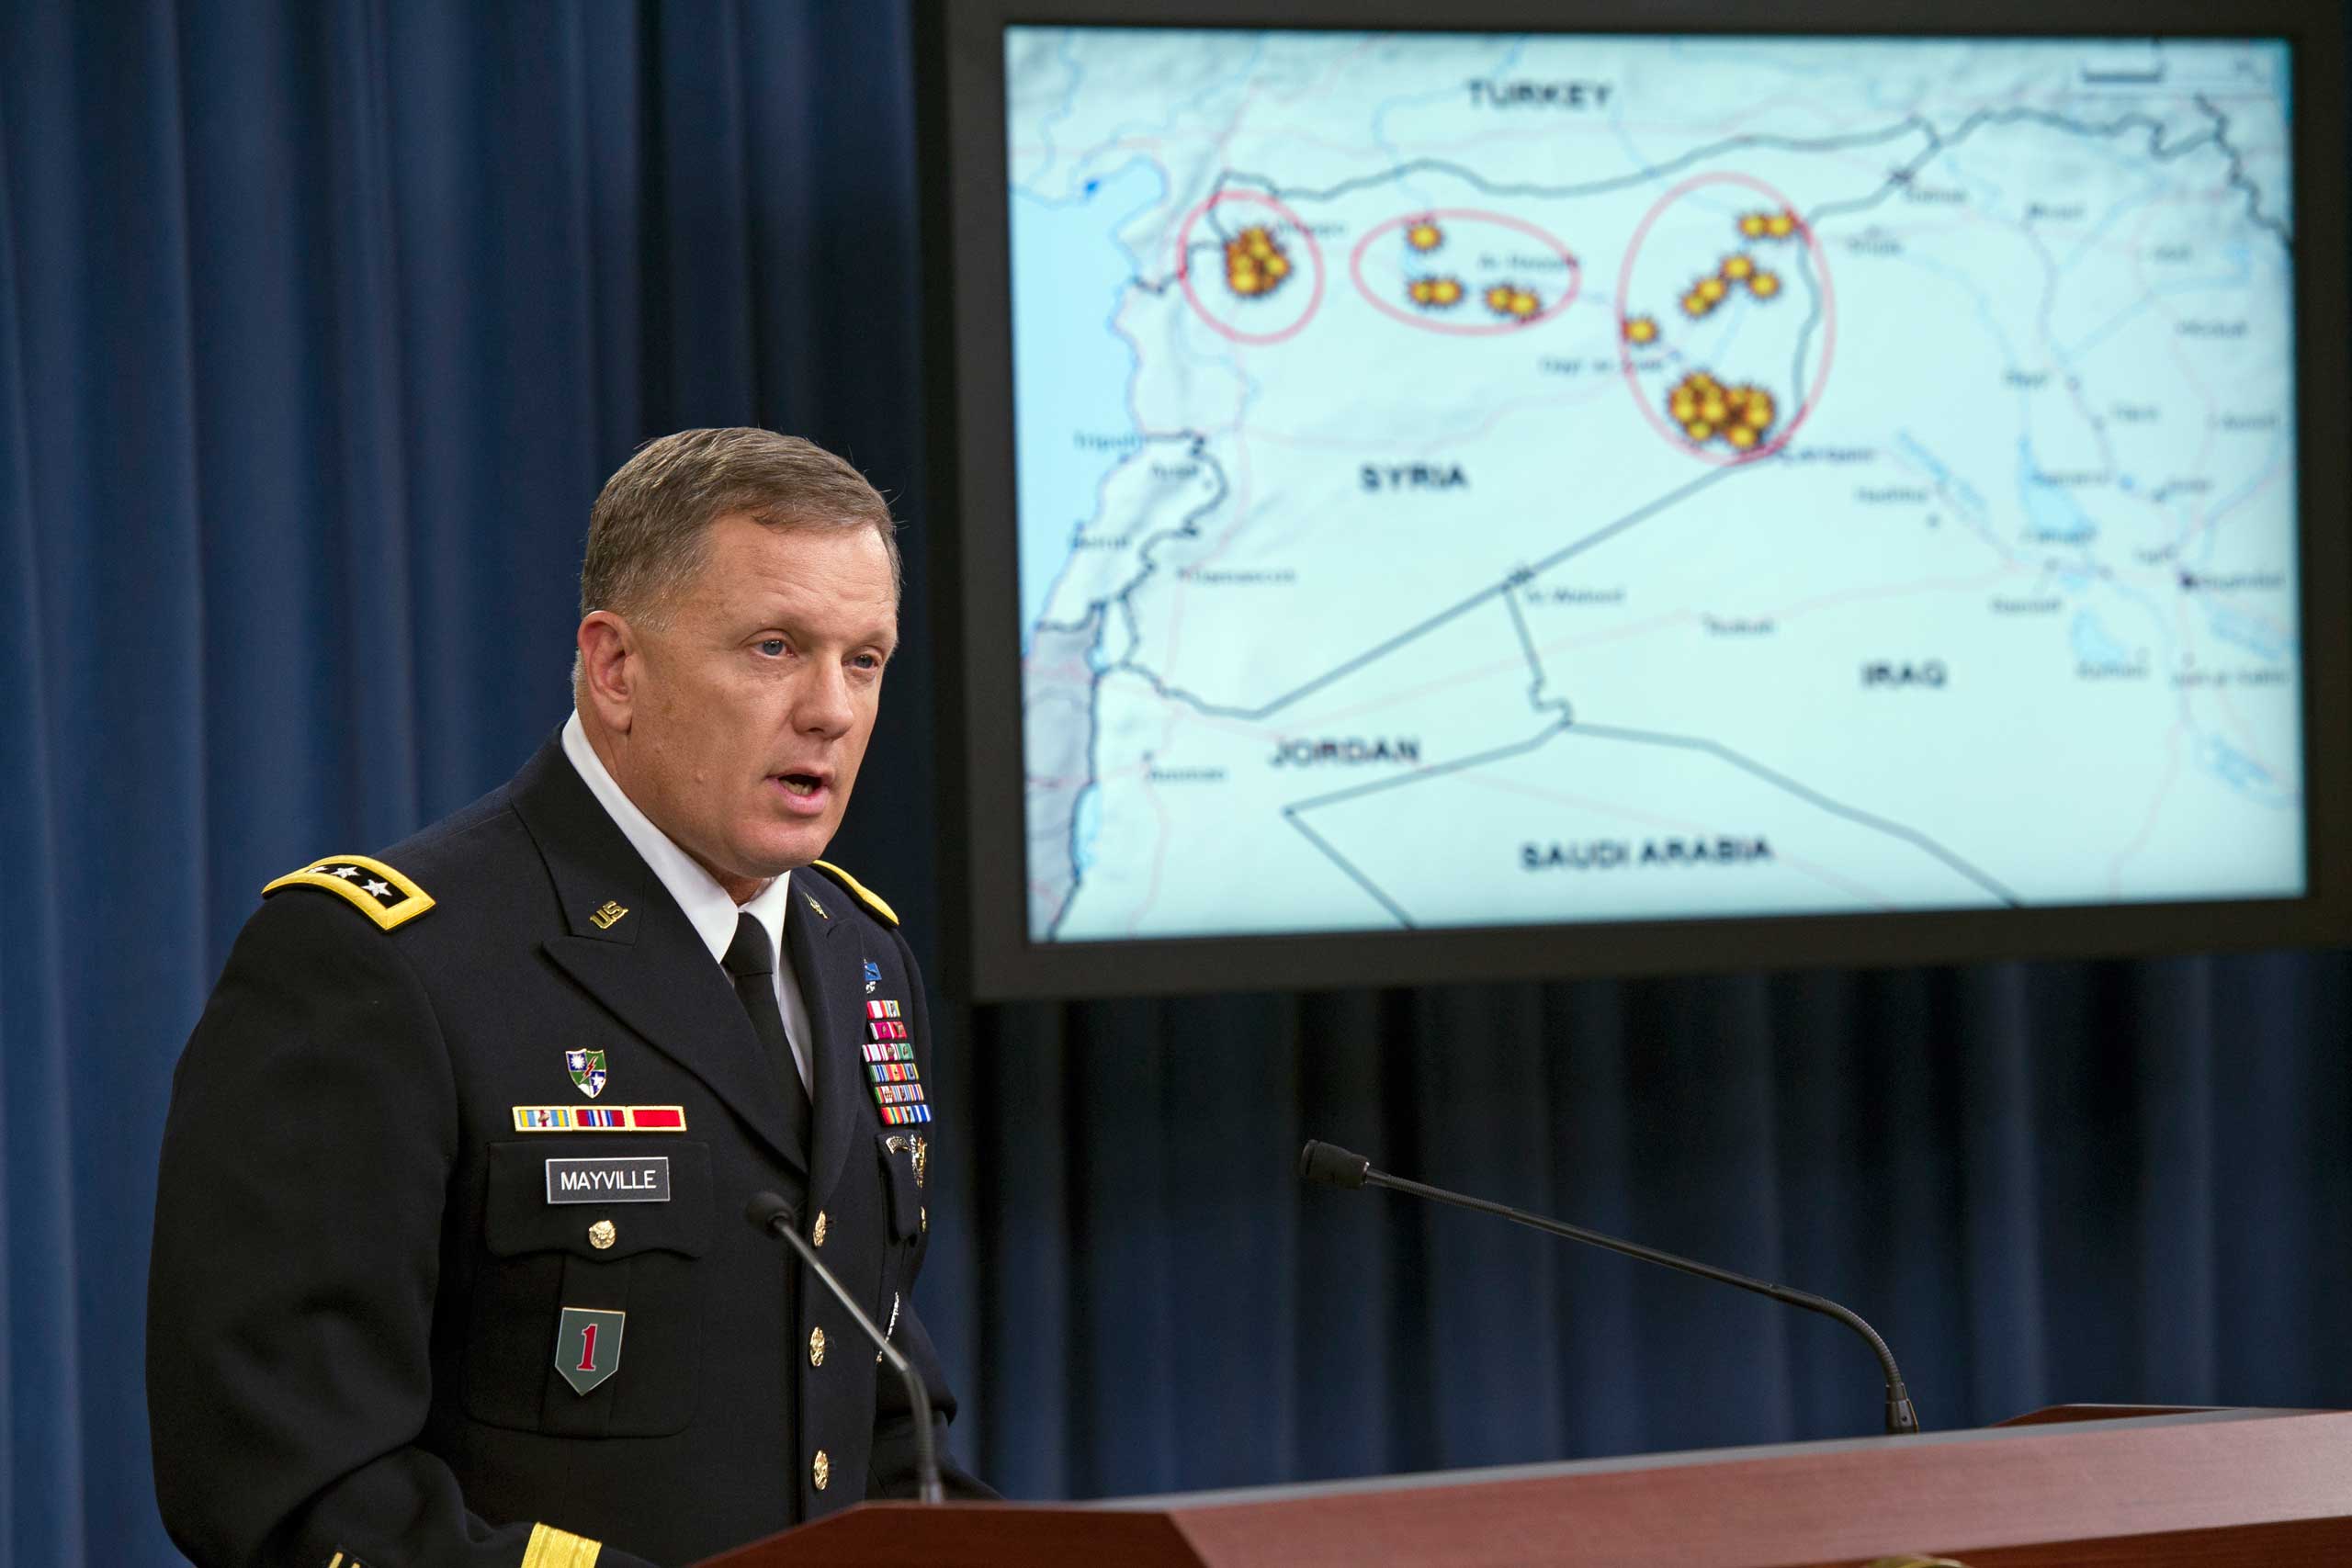 Army Lt. Gen. William Mayville, Jr., Director of Operations J3, speaks about the operations in Syria, Sept. 23, 2014, during a news conference at the Pentagon. (Cliff Owen—APe)